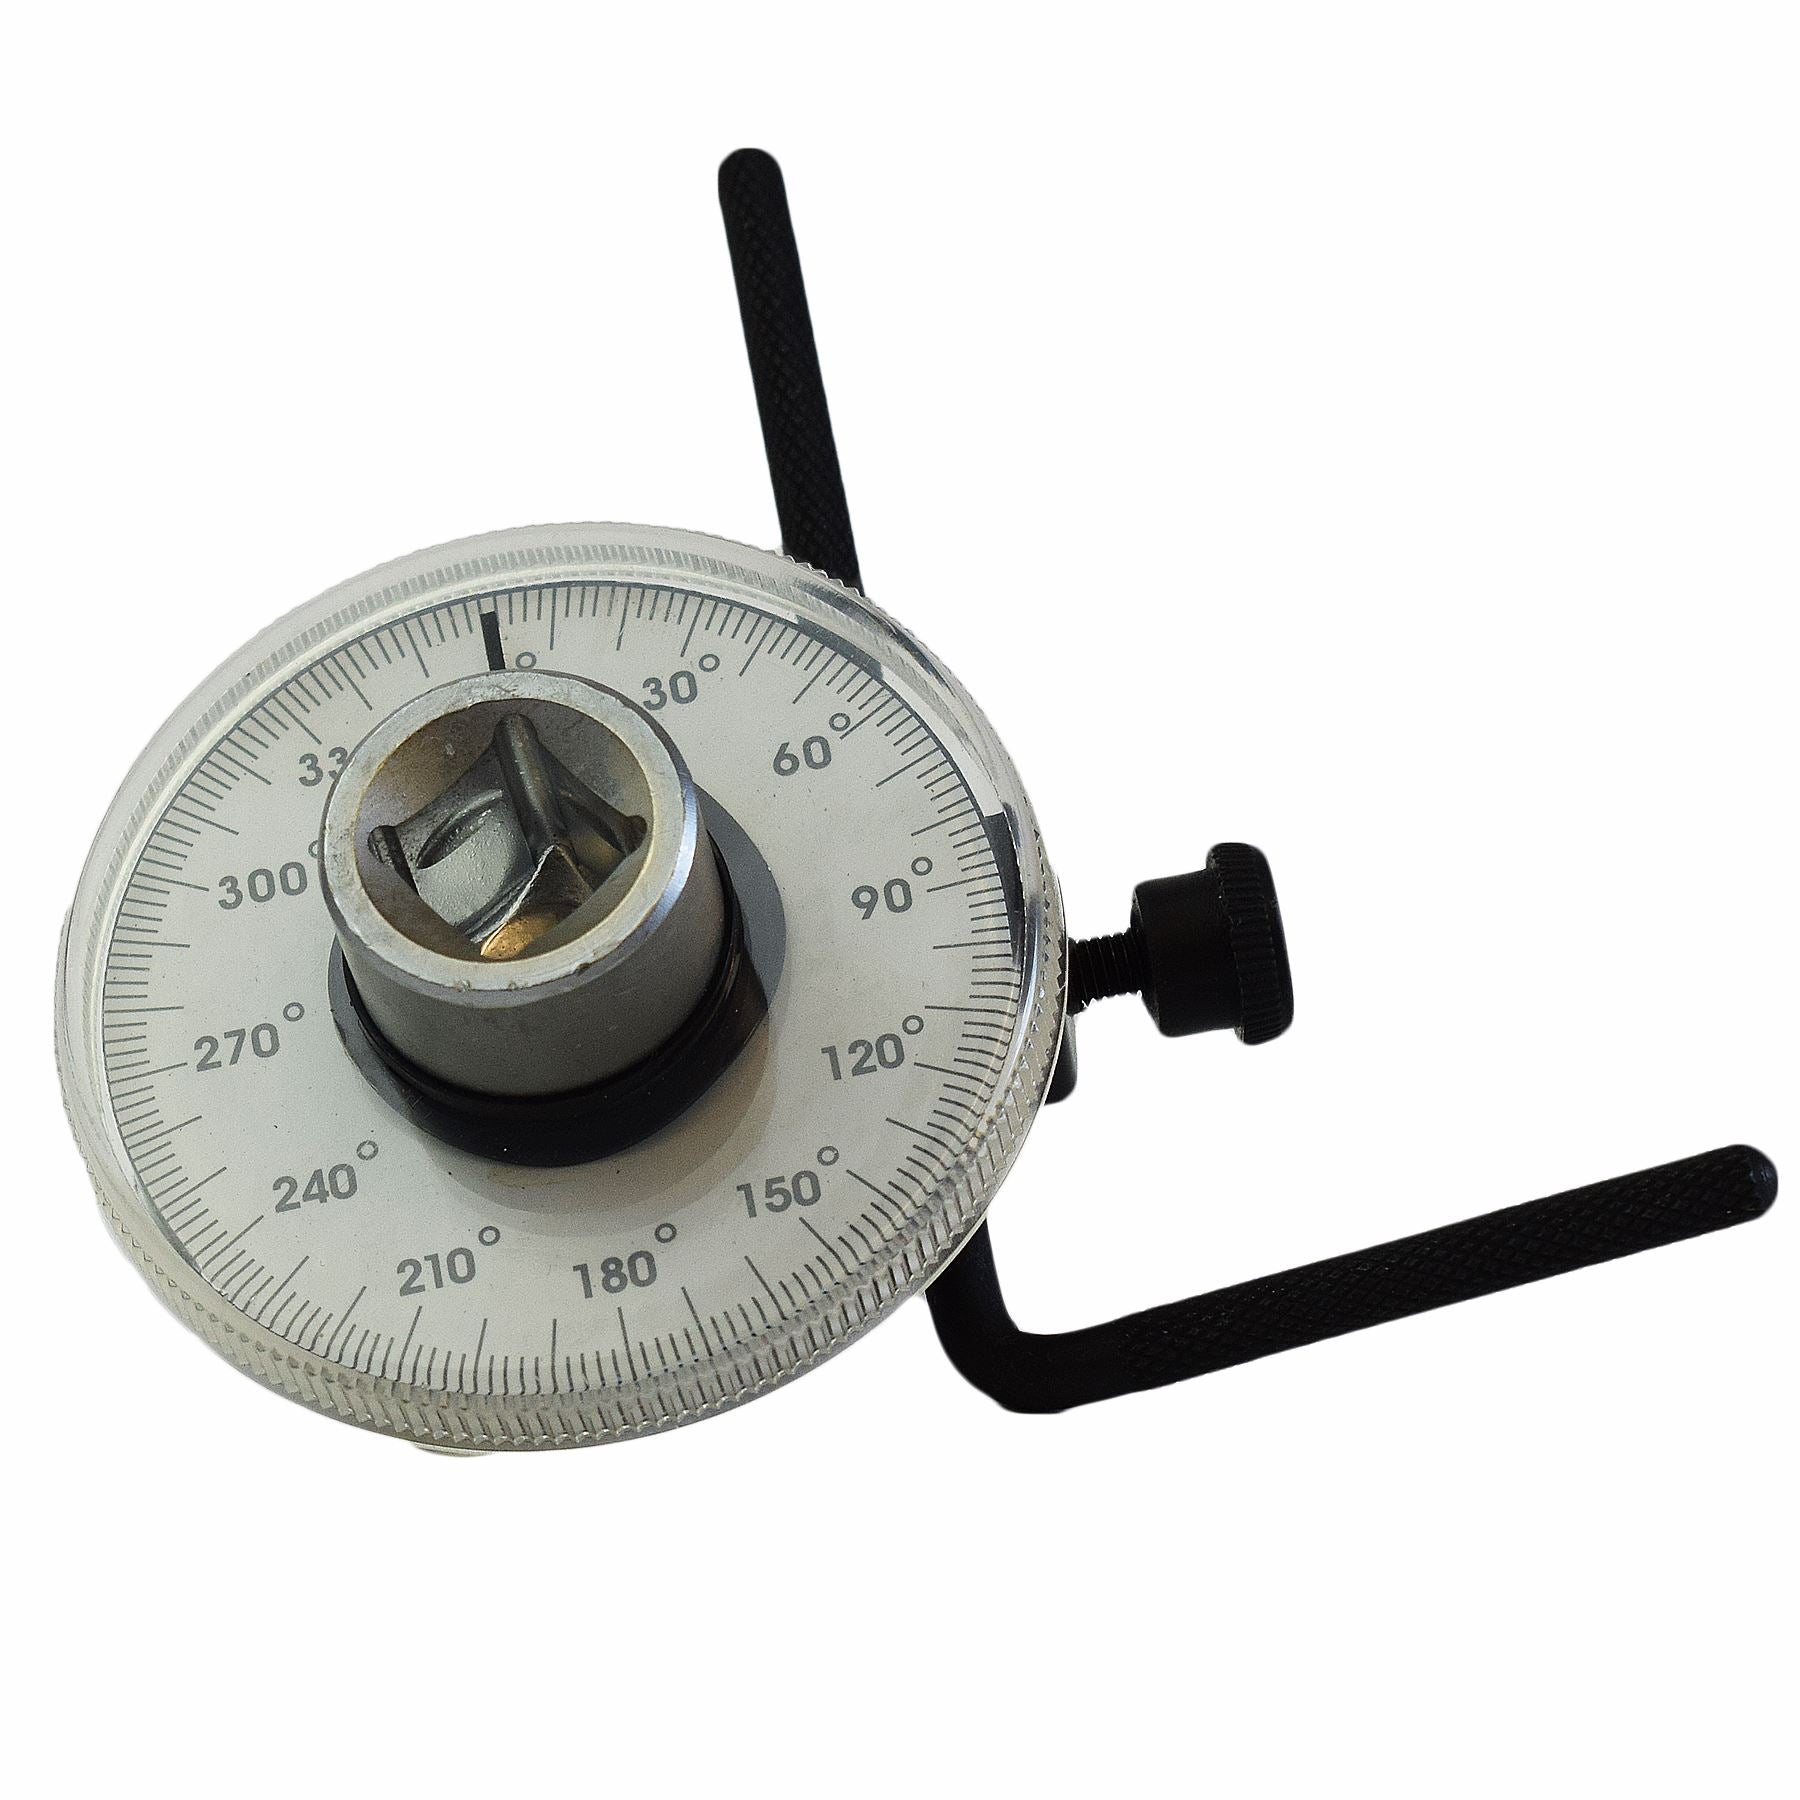 1/2" Dr Torque Angle Gauge For Torque Wrench 0-360 Degrees TE963